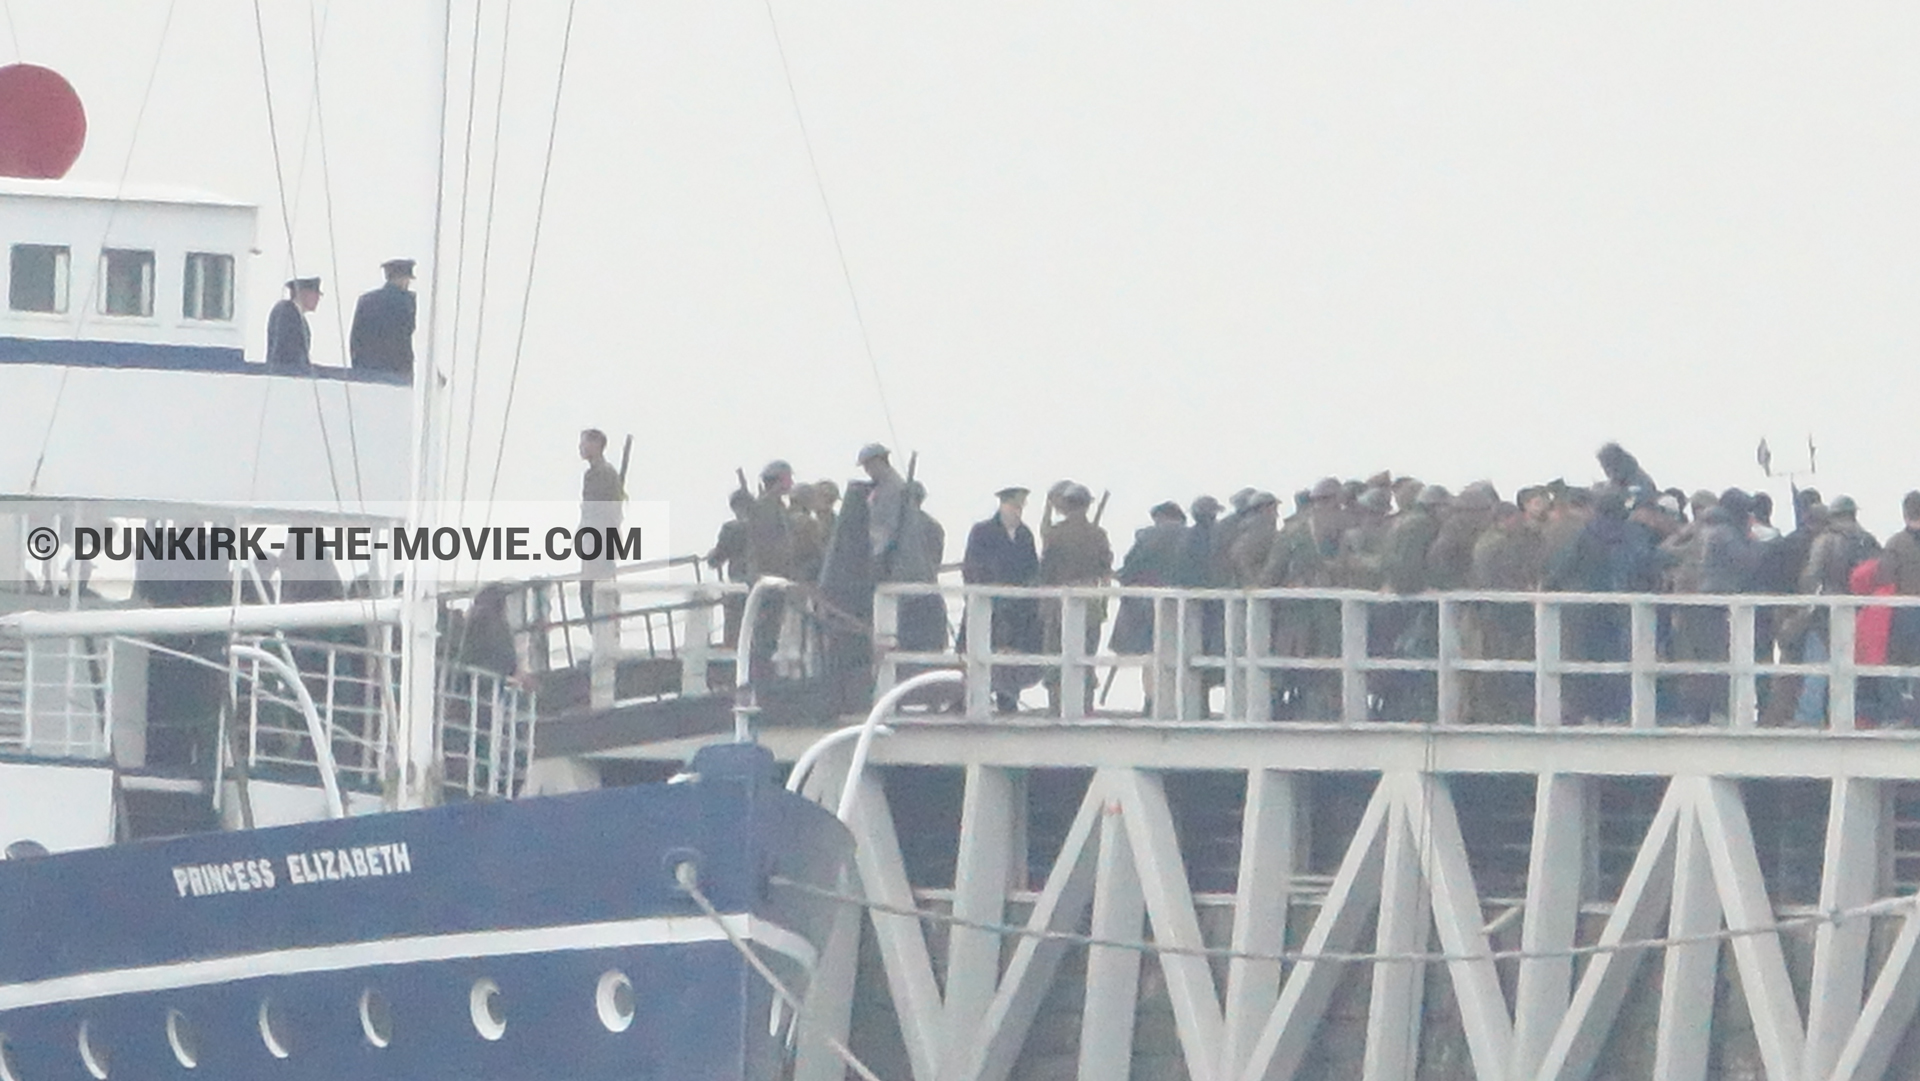 Picture with grey sky, supernumeraries, EST pier, Kenneth Branagh, Princess Elizabeth,  from behind the scene of the Dunkirk movie by Nolan